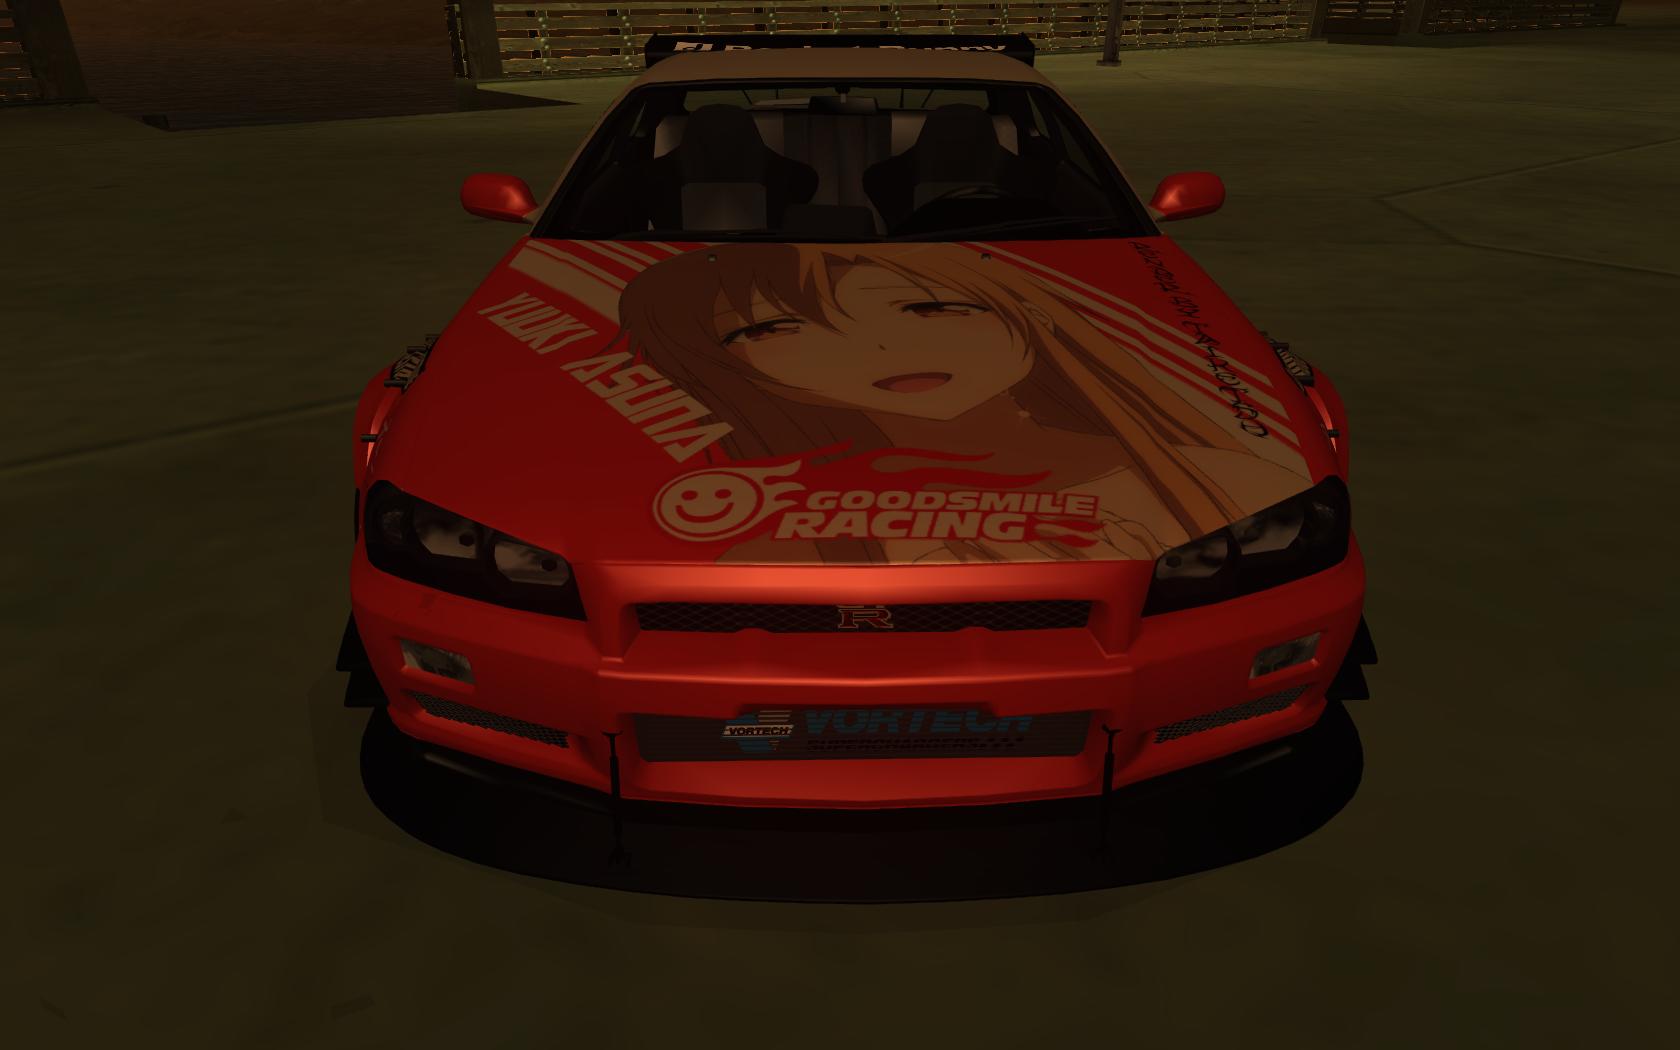 General 1680x1050 Nissan Nissan Skyline R34 tuning Grand Theft Auto Itasha video games Japanese cars red cars vehicle PC gaming screen shot Grand Theft Auto: San Andreas Nissan Skyline car